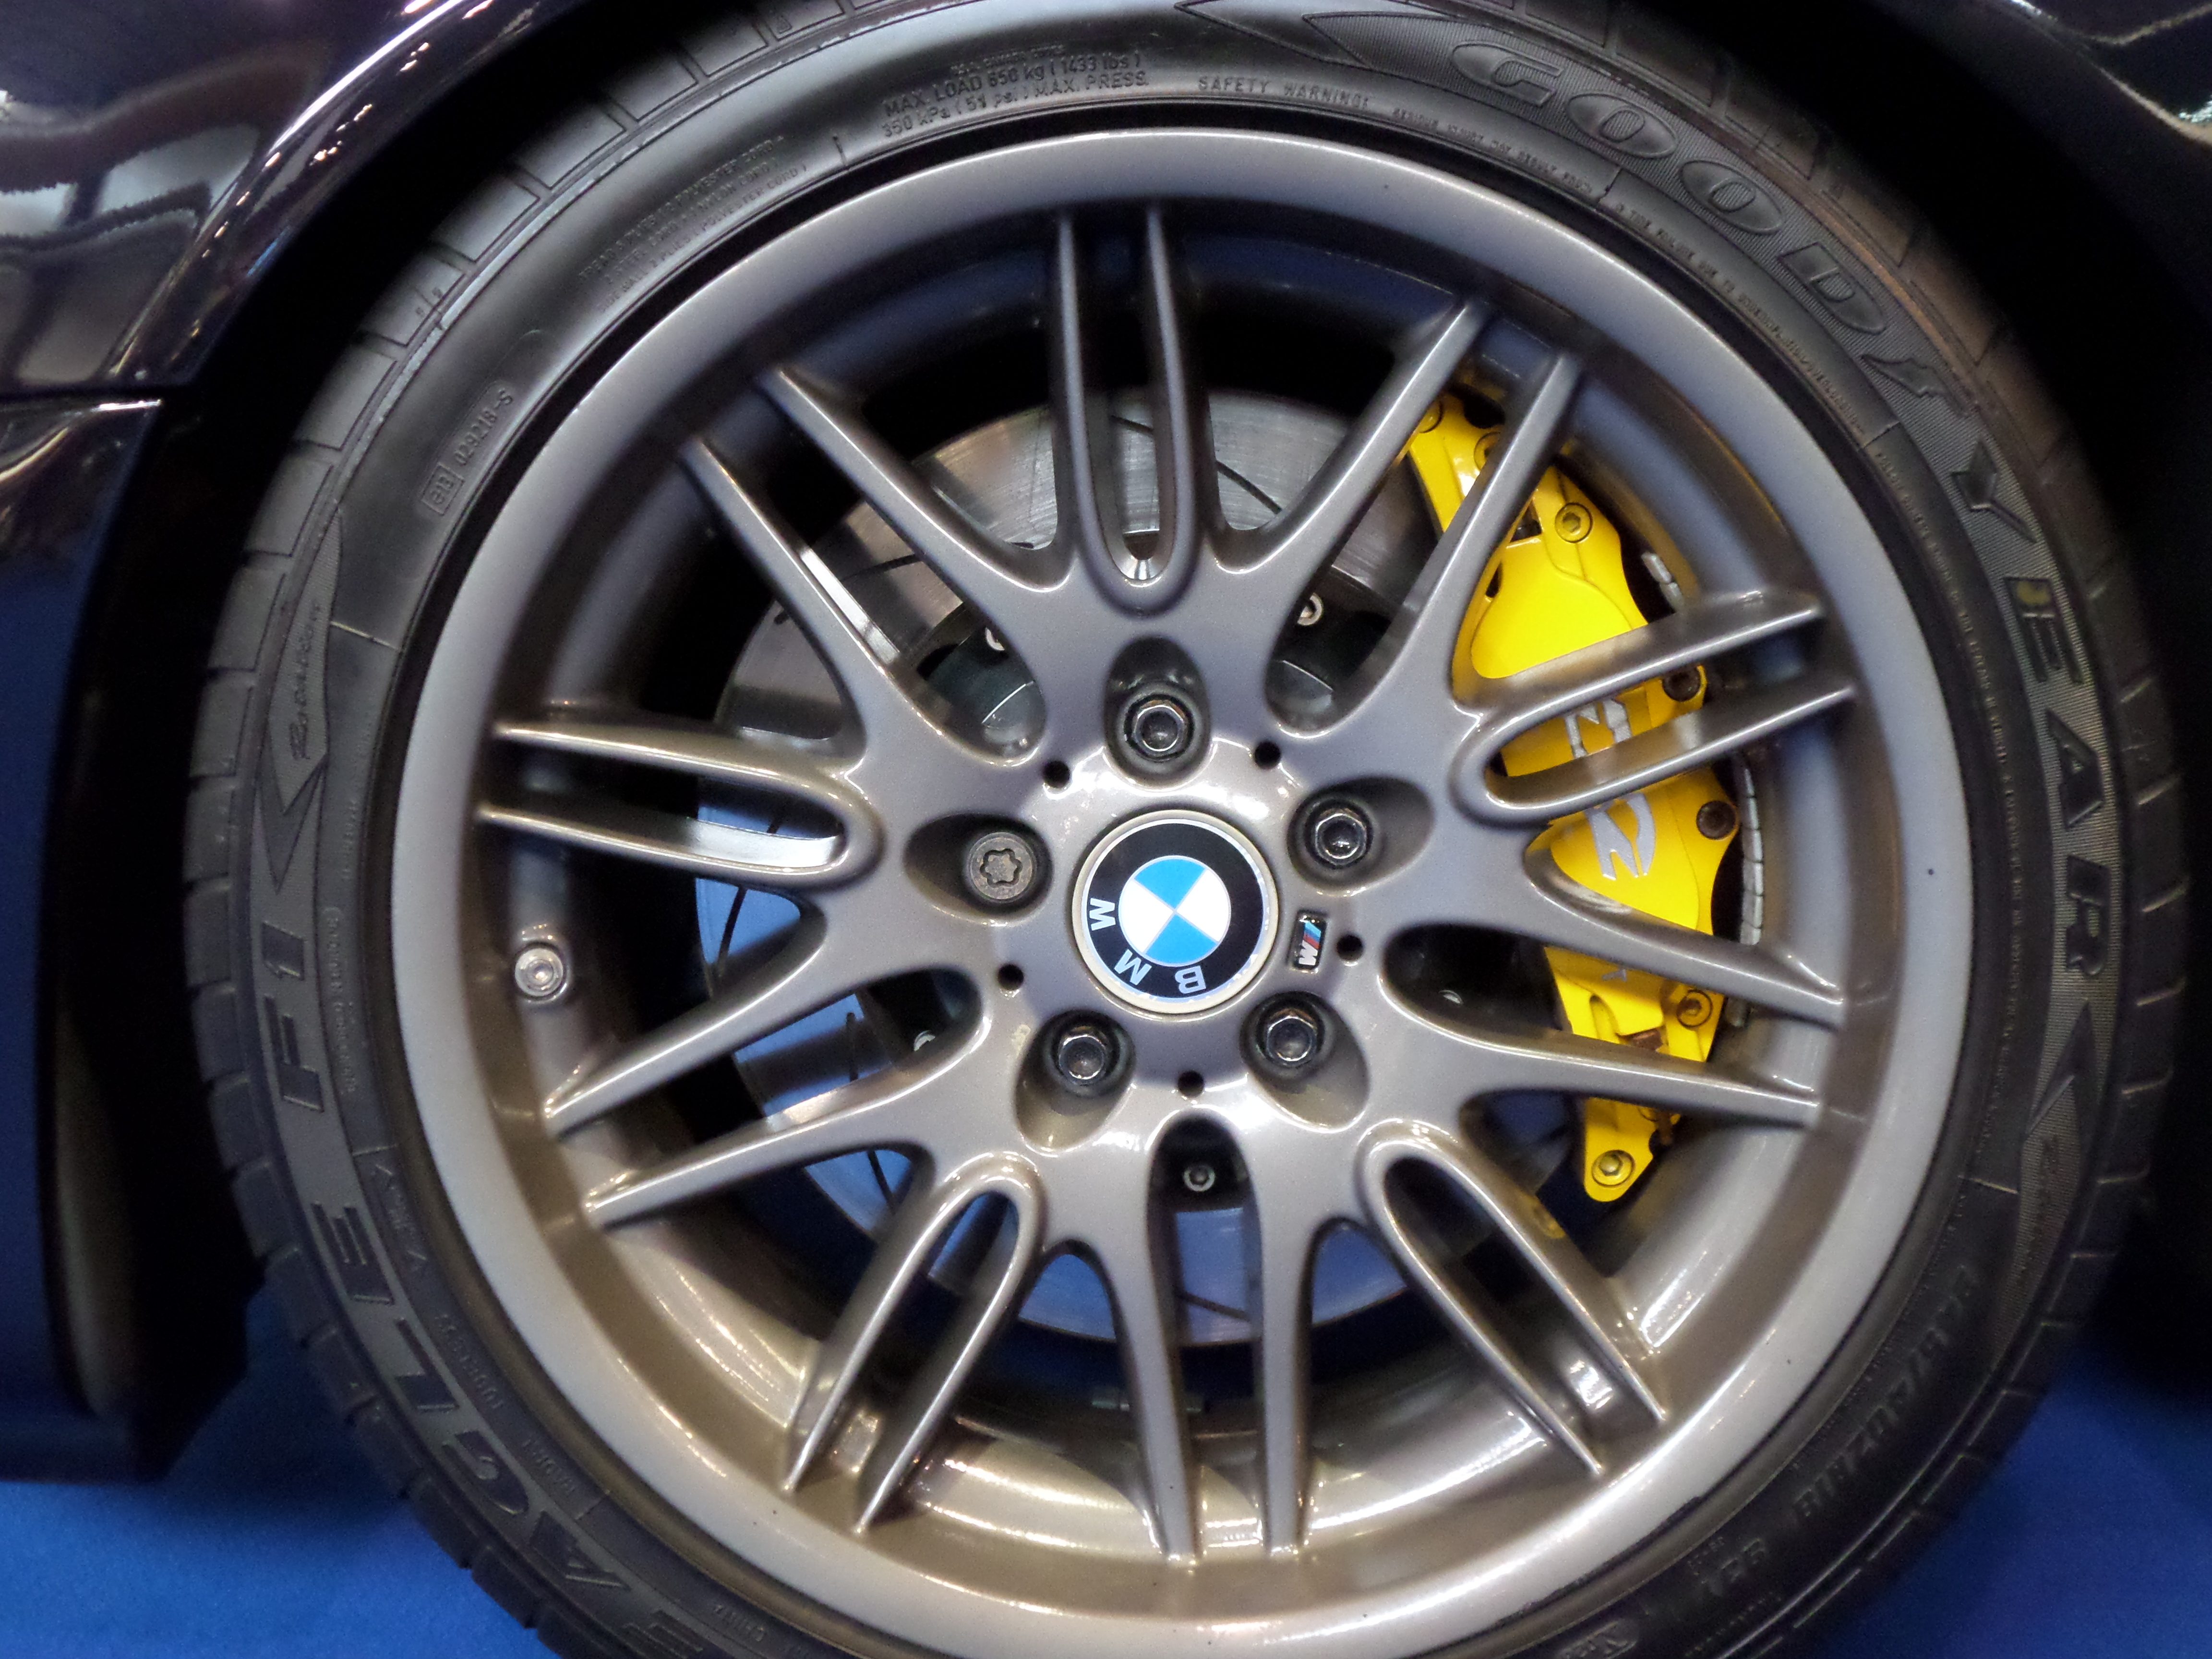 BMW M5: Rims (and brakes) to remember...